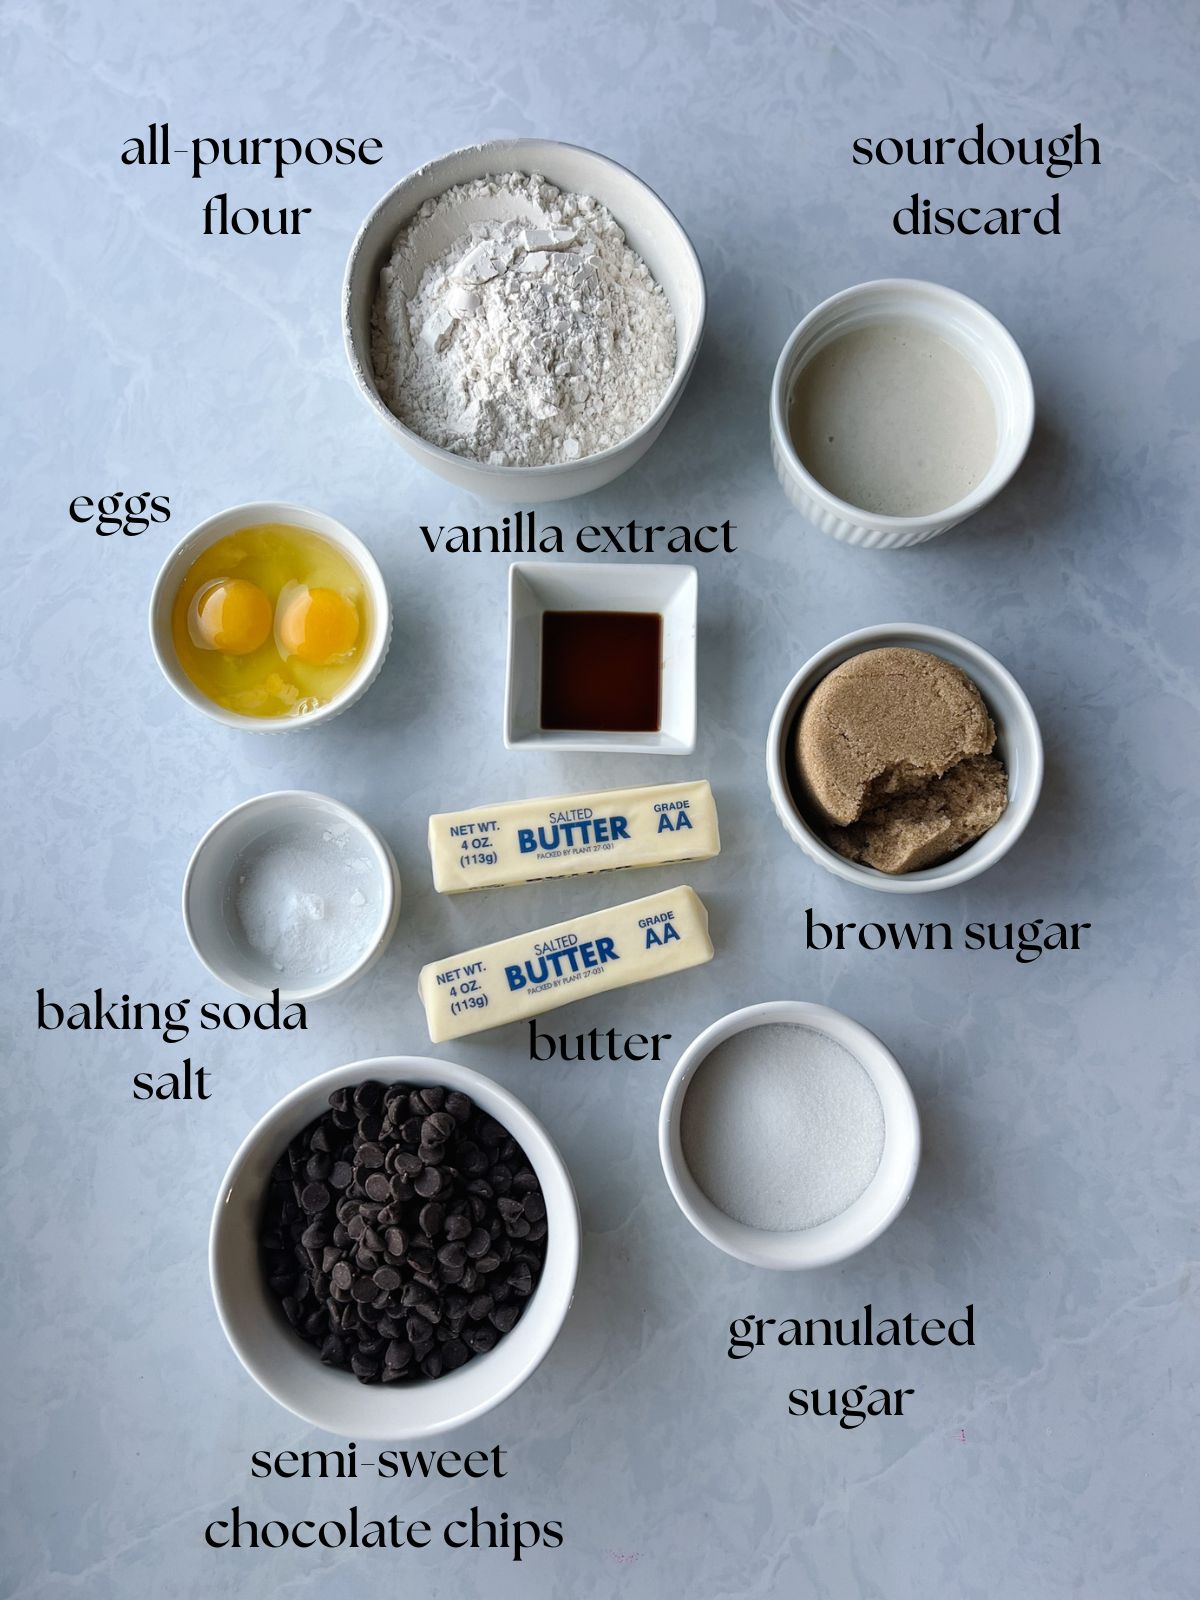 Picture of ingredients needed for sourdough chocolate chip cookies. All-purpose flour, sourdough discard, vanilla extract, eggs, butter, brown sugar, granulated sugar, baking soda, salt, semi-sweet chocolate chips.